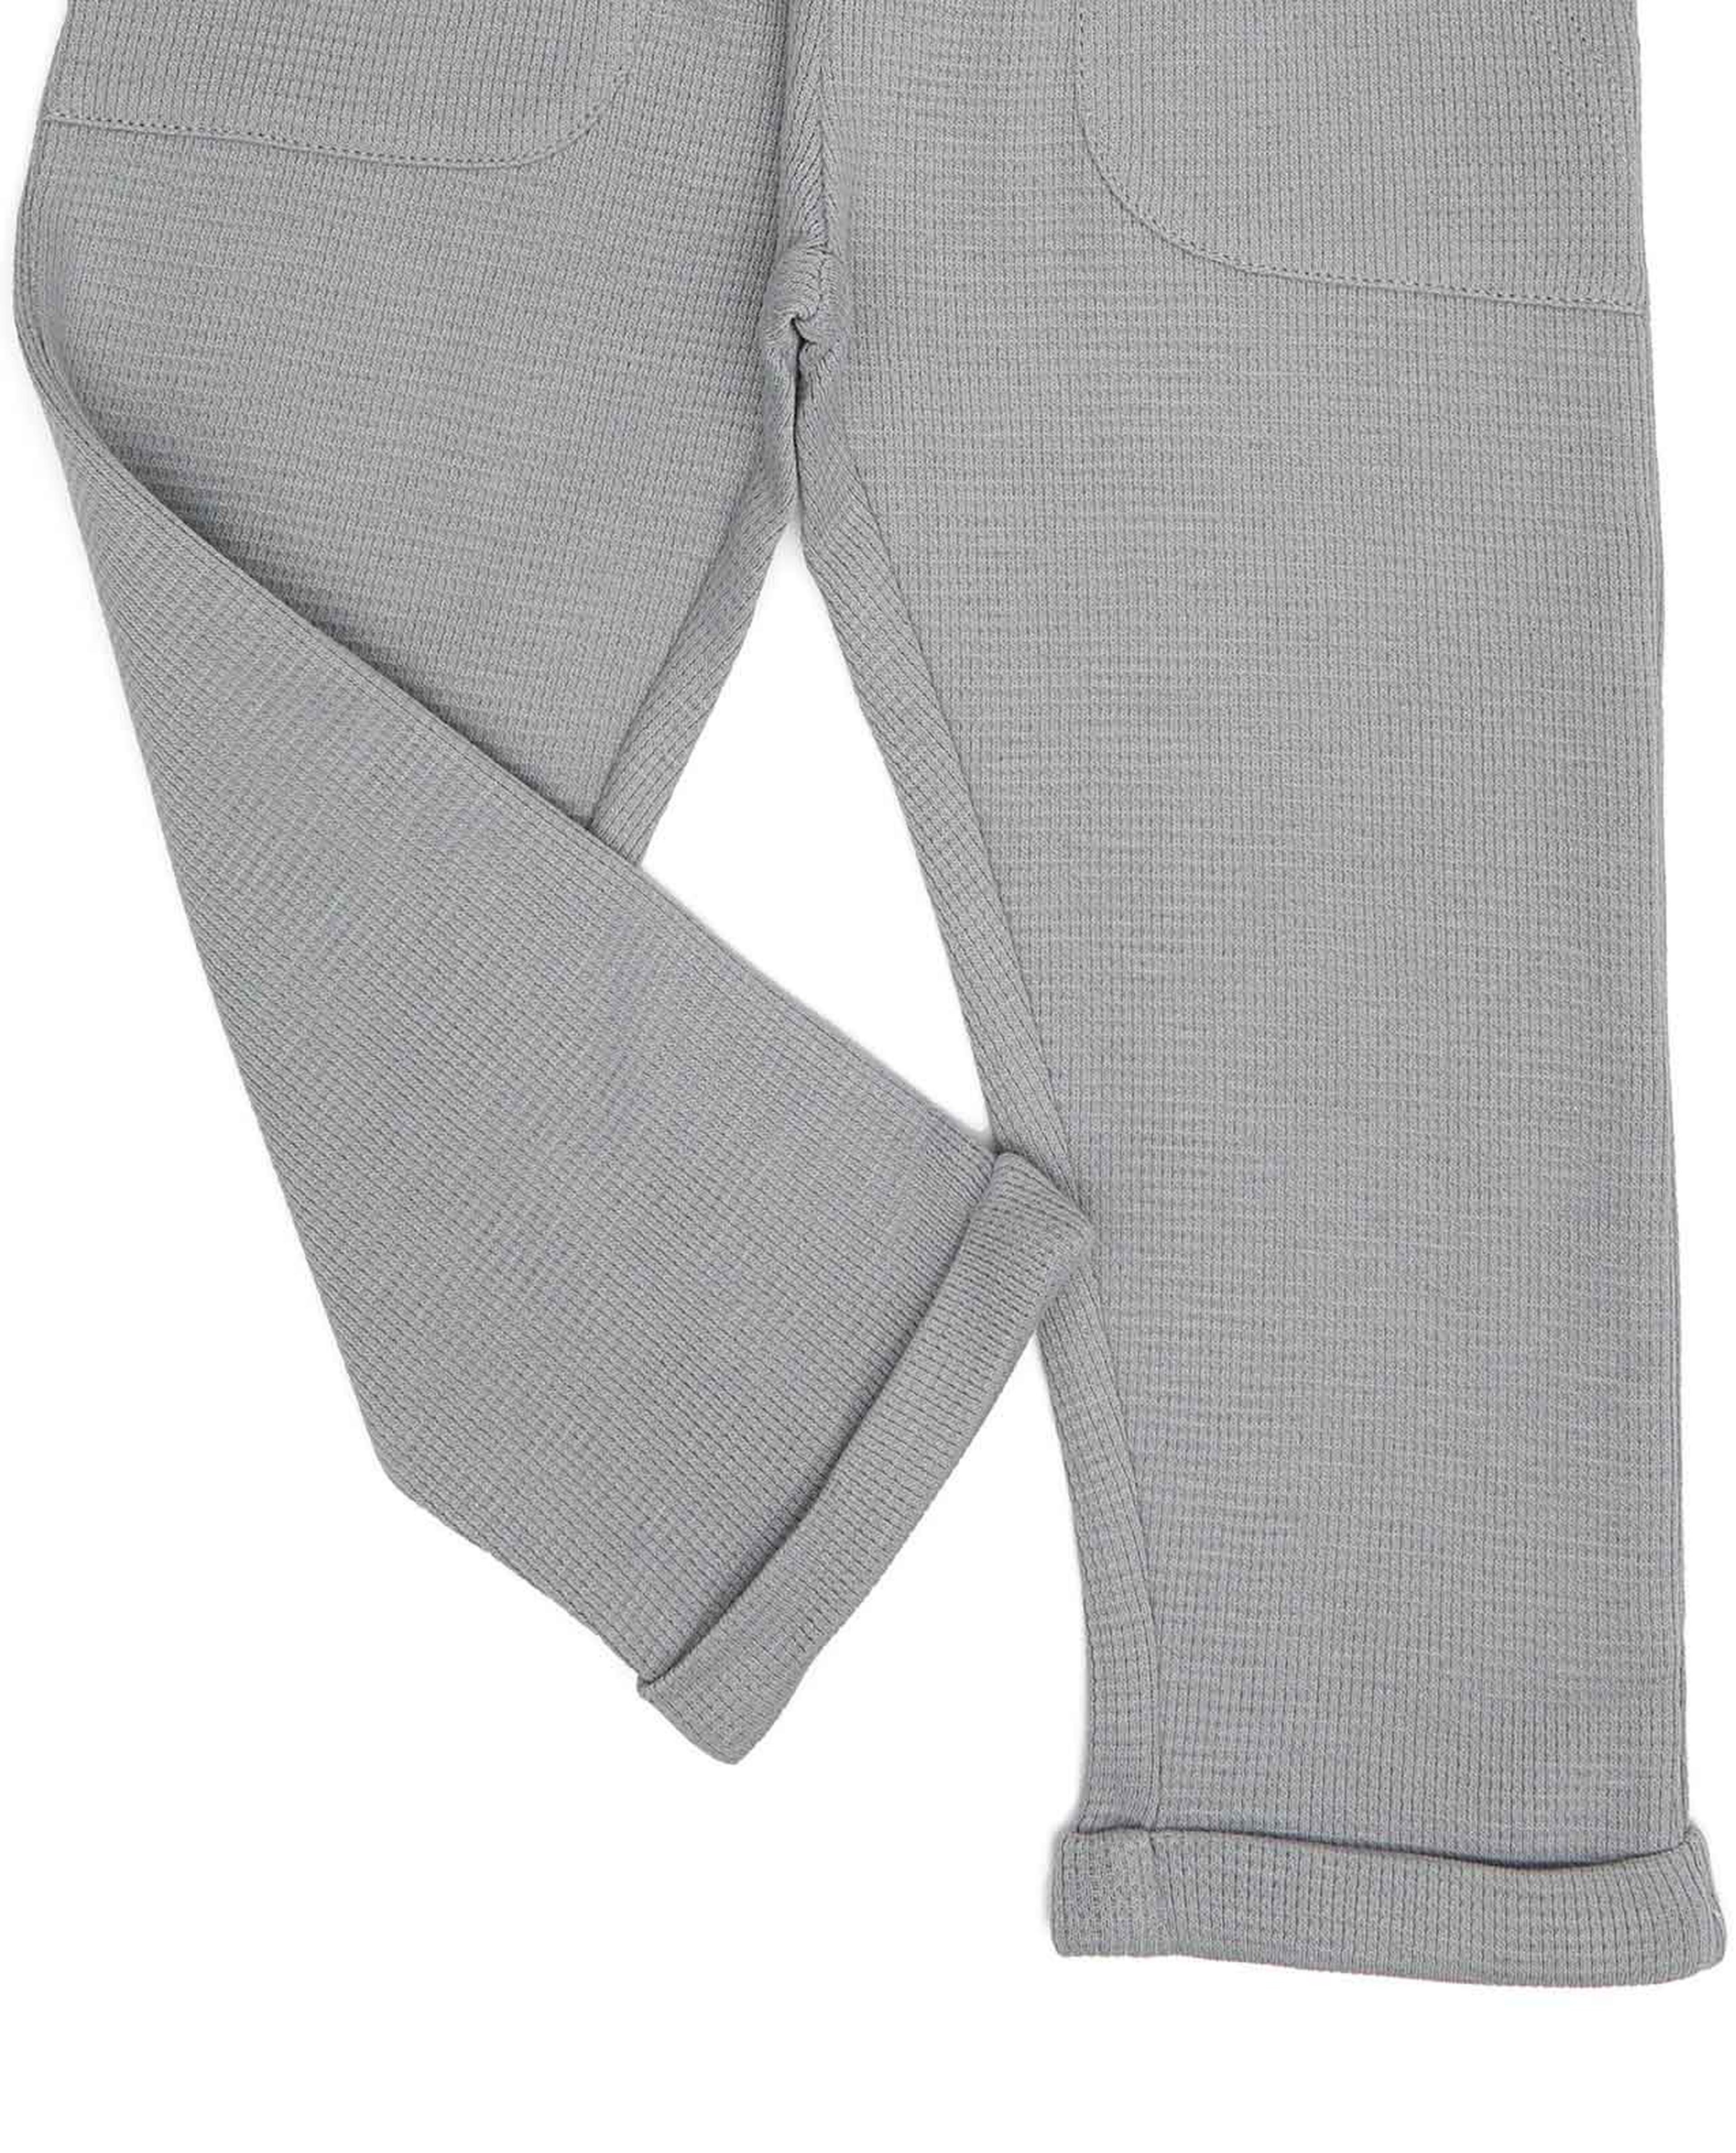 Textured Knit Pants with Drawstring Waist